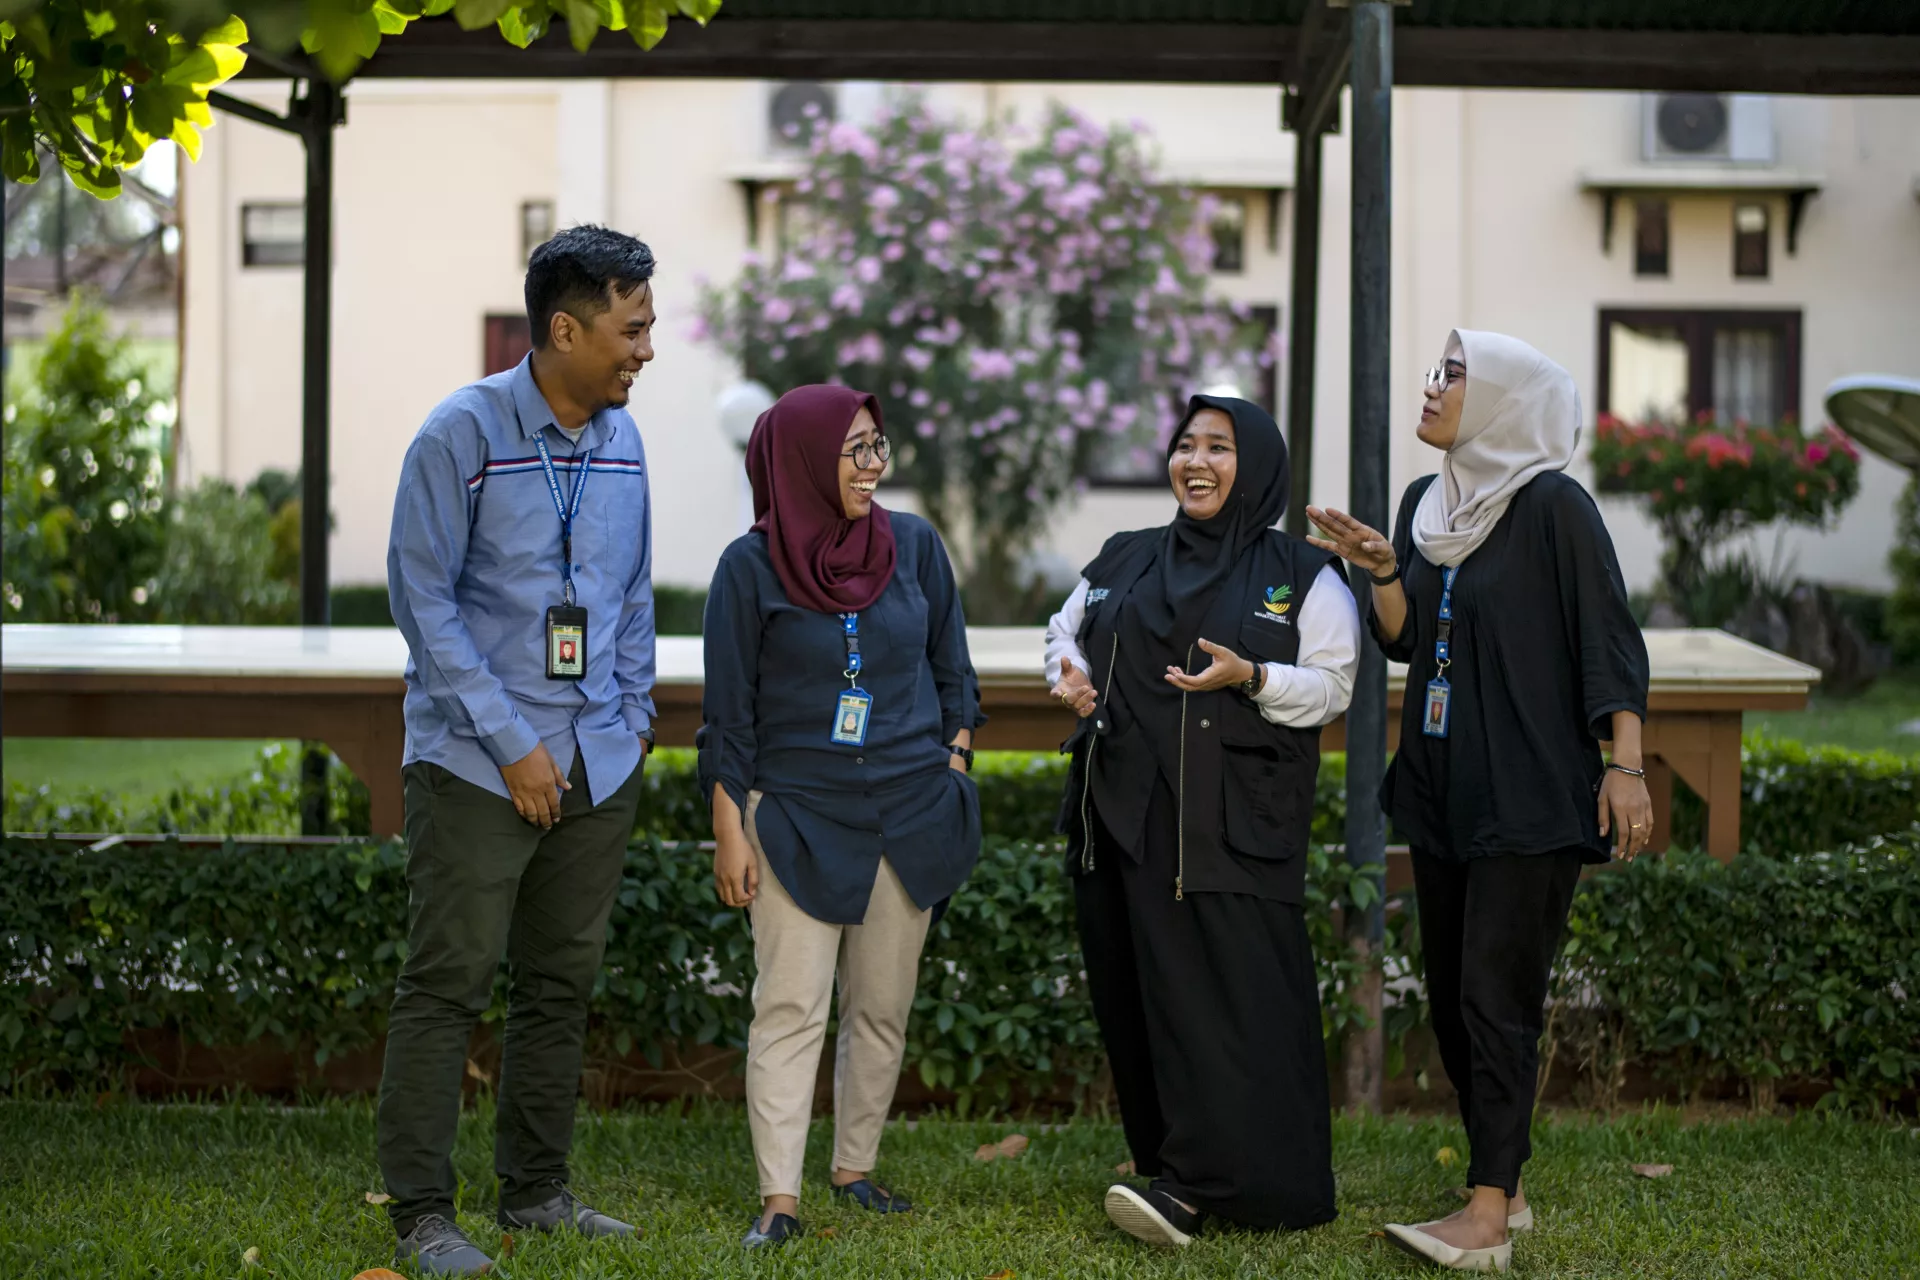 Robby Saputra (33), Ramadhani Sri Handayani (32), Nurfanny (30), and Triyana Sari (30) pose in front of the camera in the park in the Social Office office area in Palu, Central Sulawesi, Indonesia, on 11 September 2019. 